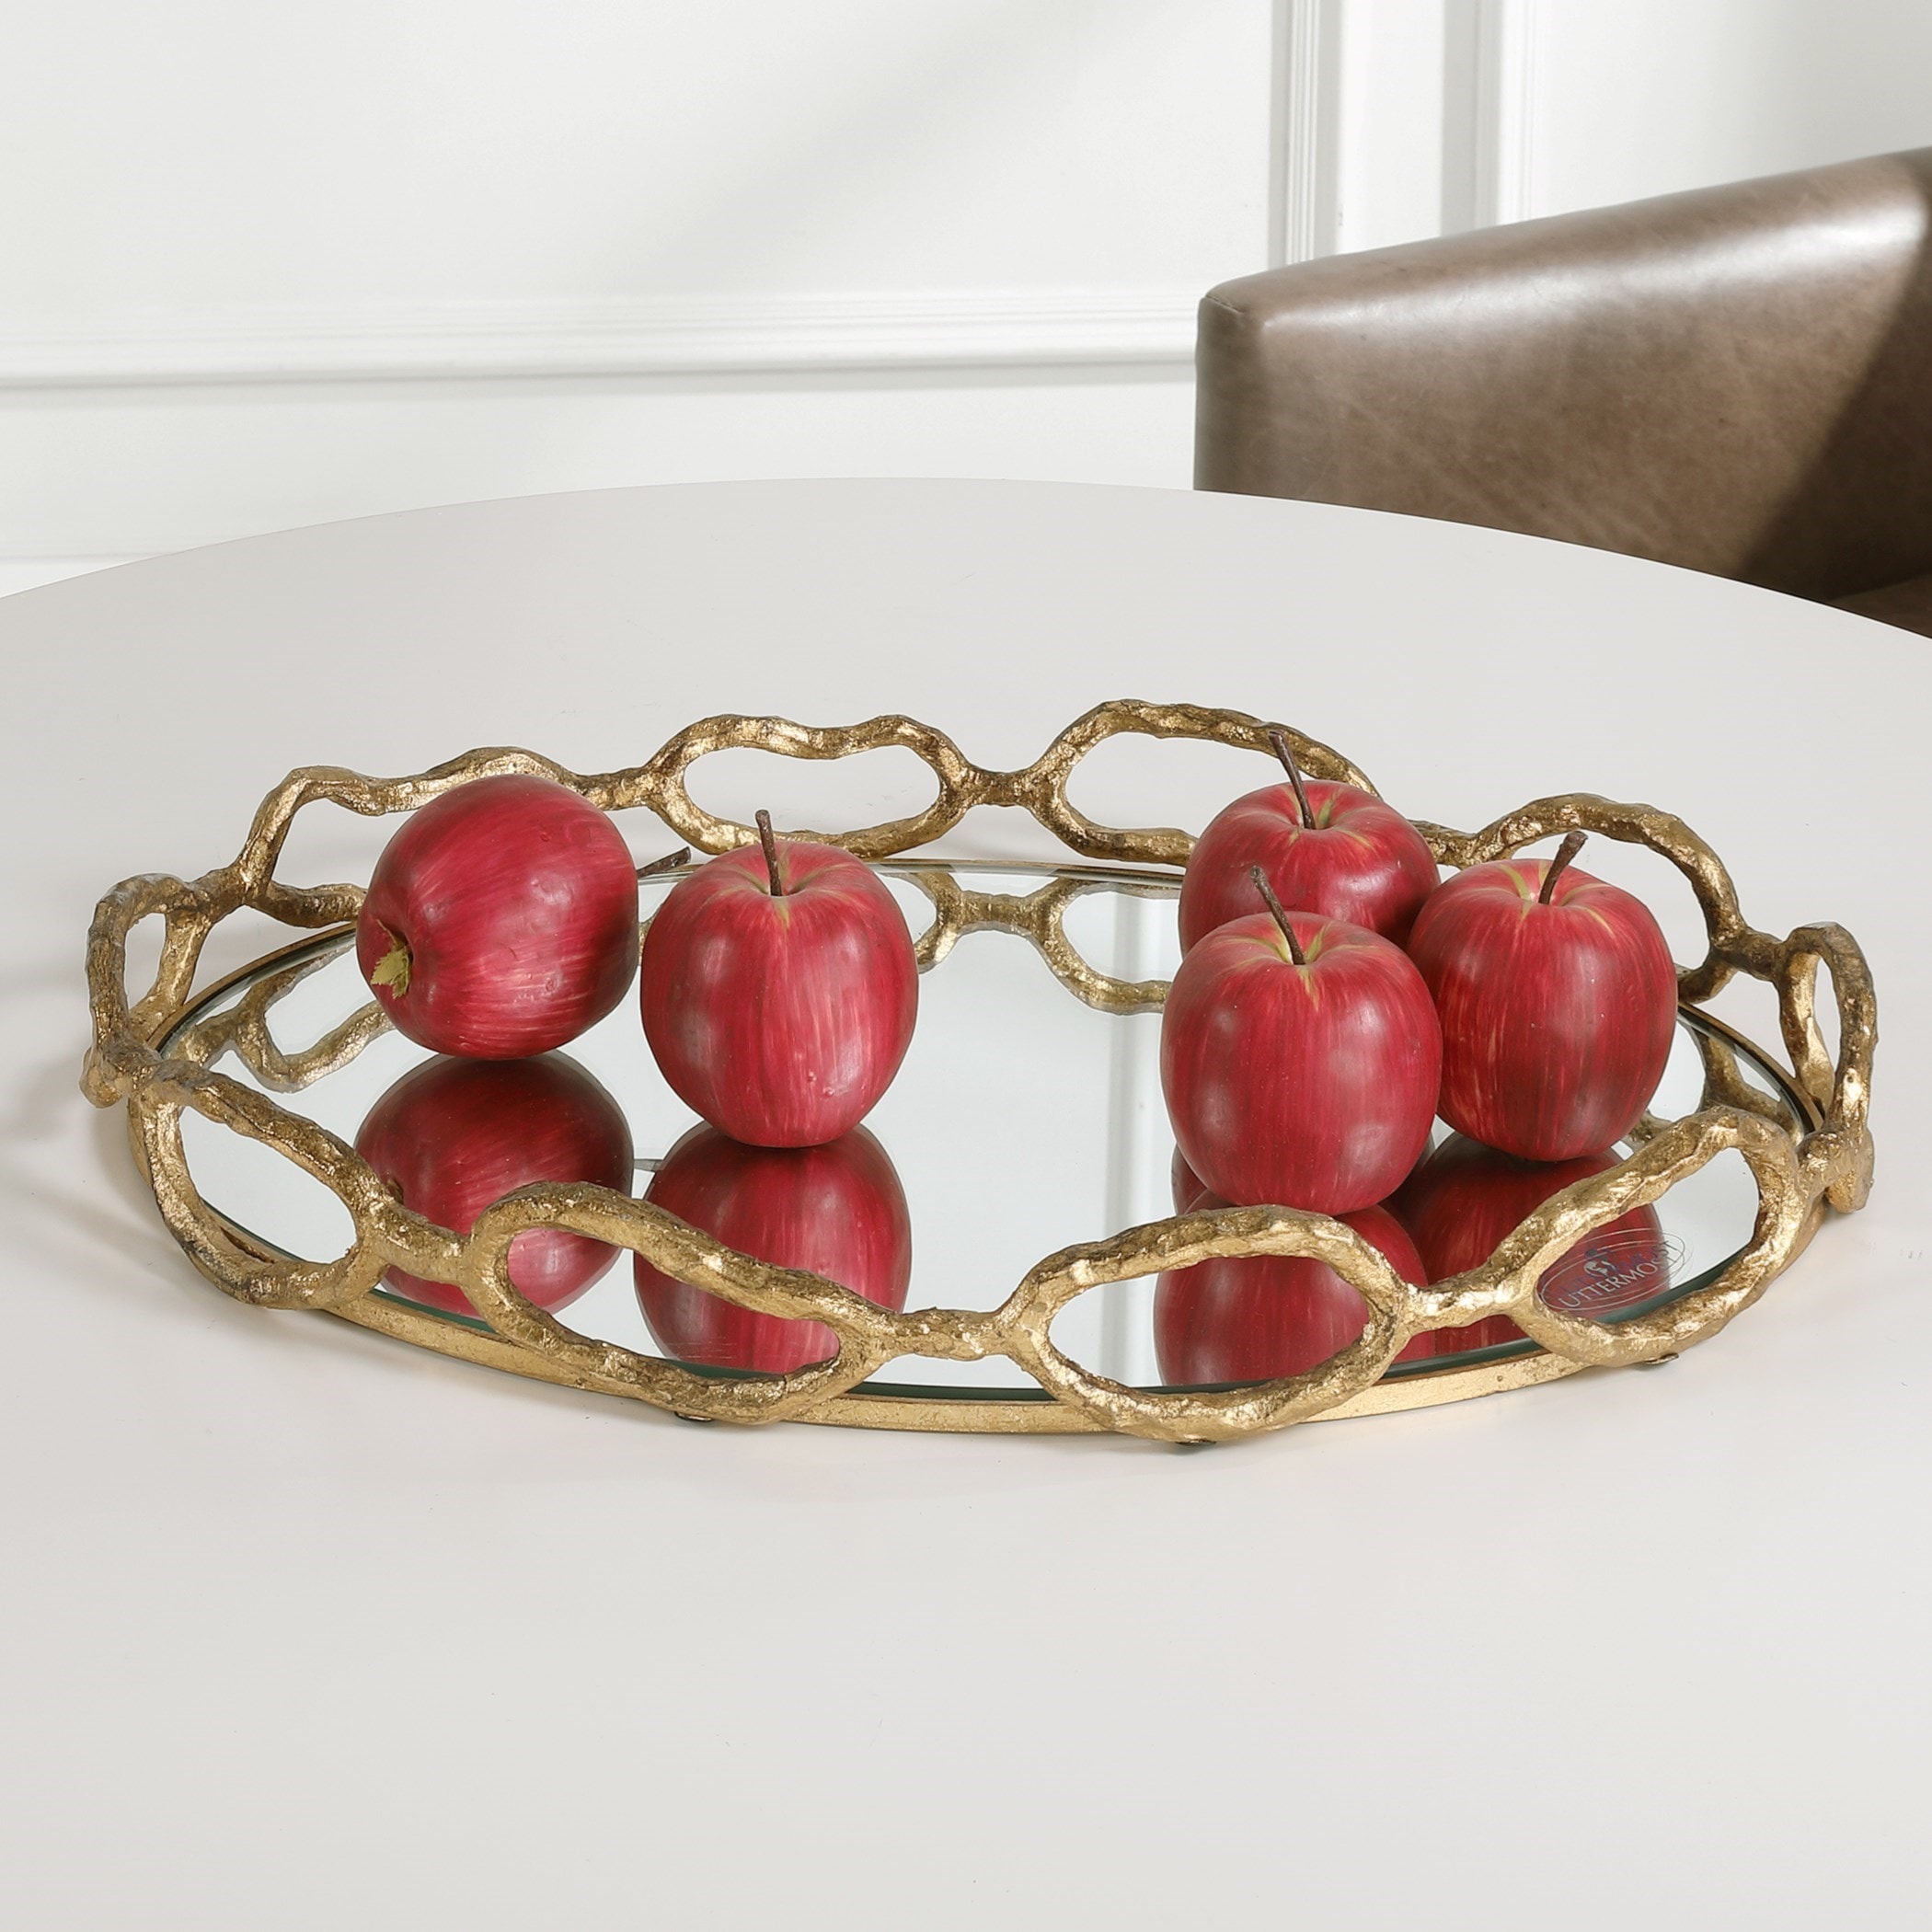 Uttermost Accessories Cable Chain Mirrored Tray Adcock Furniture  Accessories